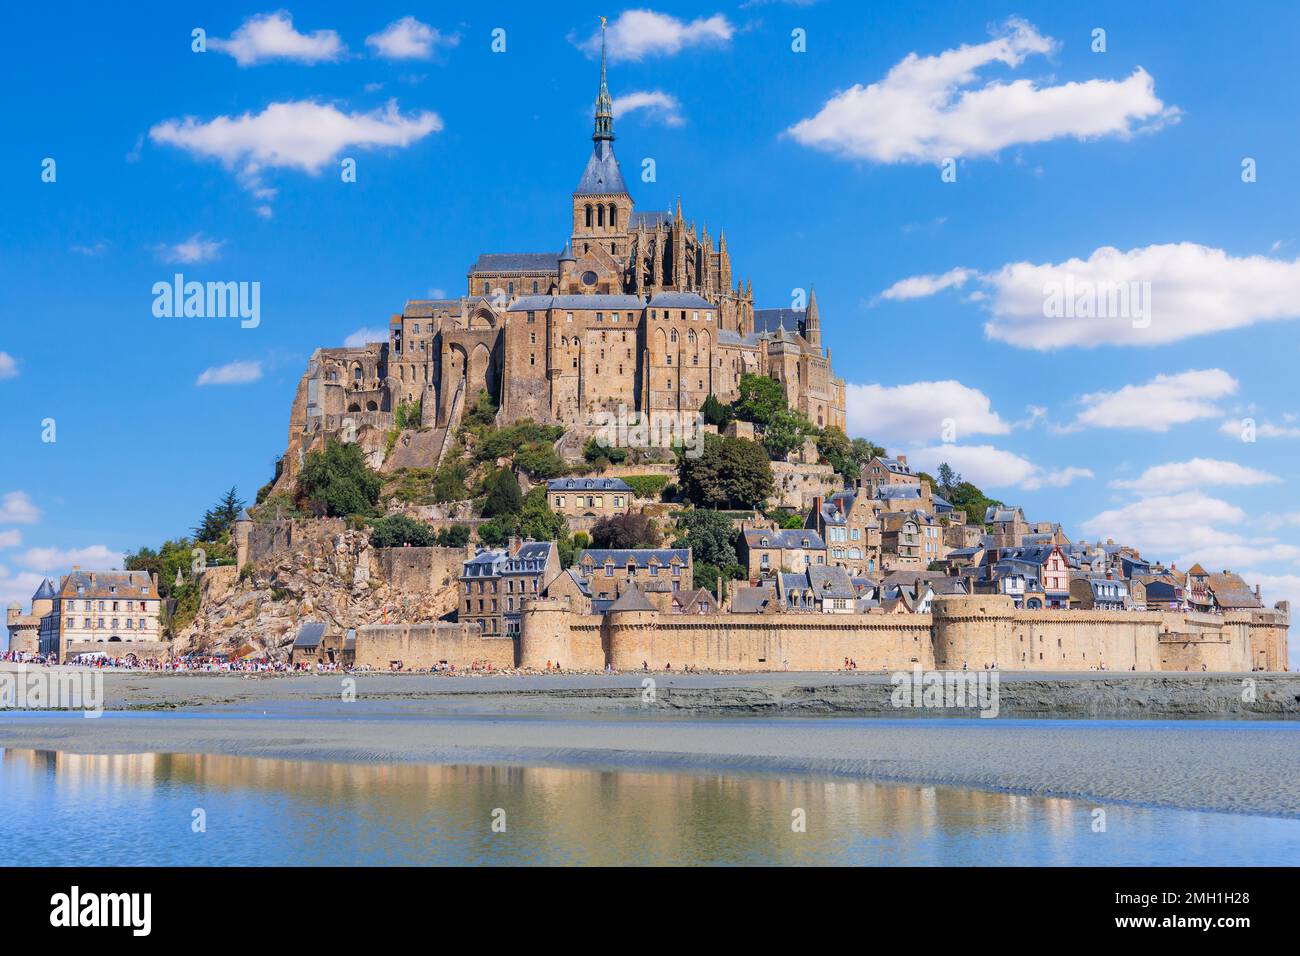 Classic view of famous Mont Saint-Michel tidal island. Normandy, France. Stock Photo